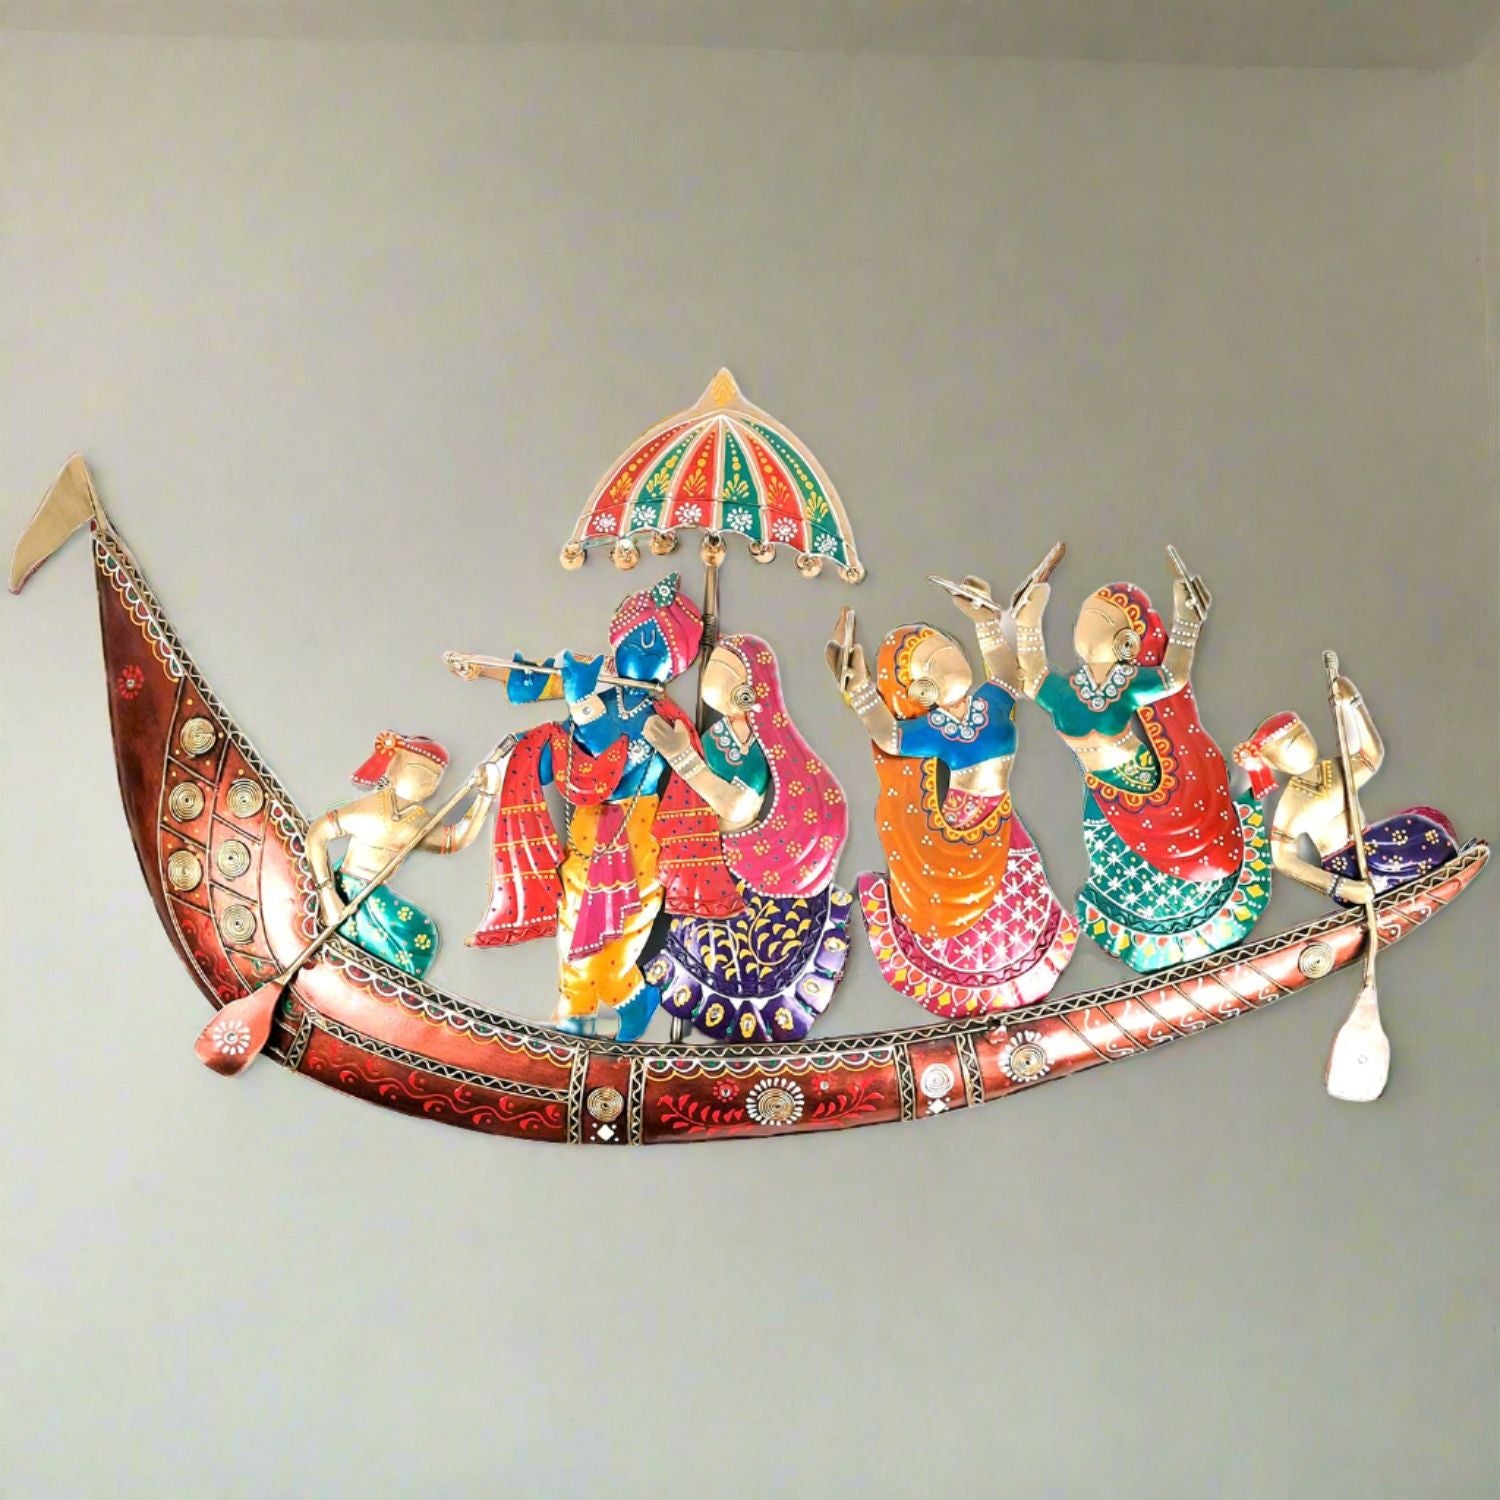 Wall Hanging with LED Lights - Radha Krishna With Gopis Design | Decorative Backlit Metal Wall Decor - For Home, Office, Living Room Wall Decor & Gifts - 33 Inch - apkamart